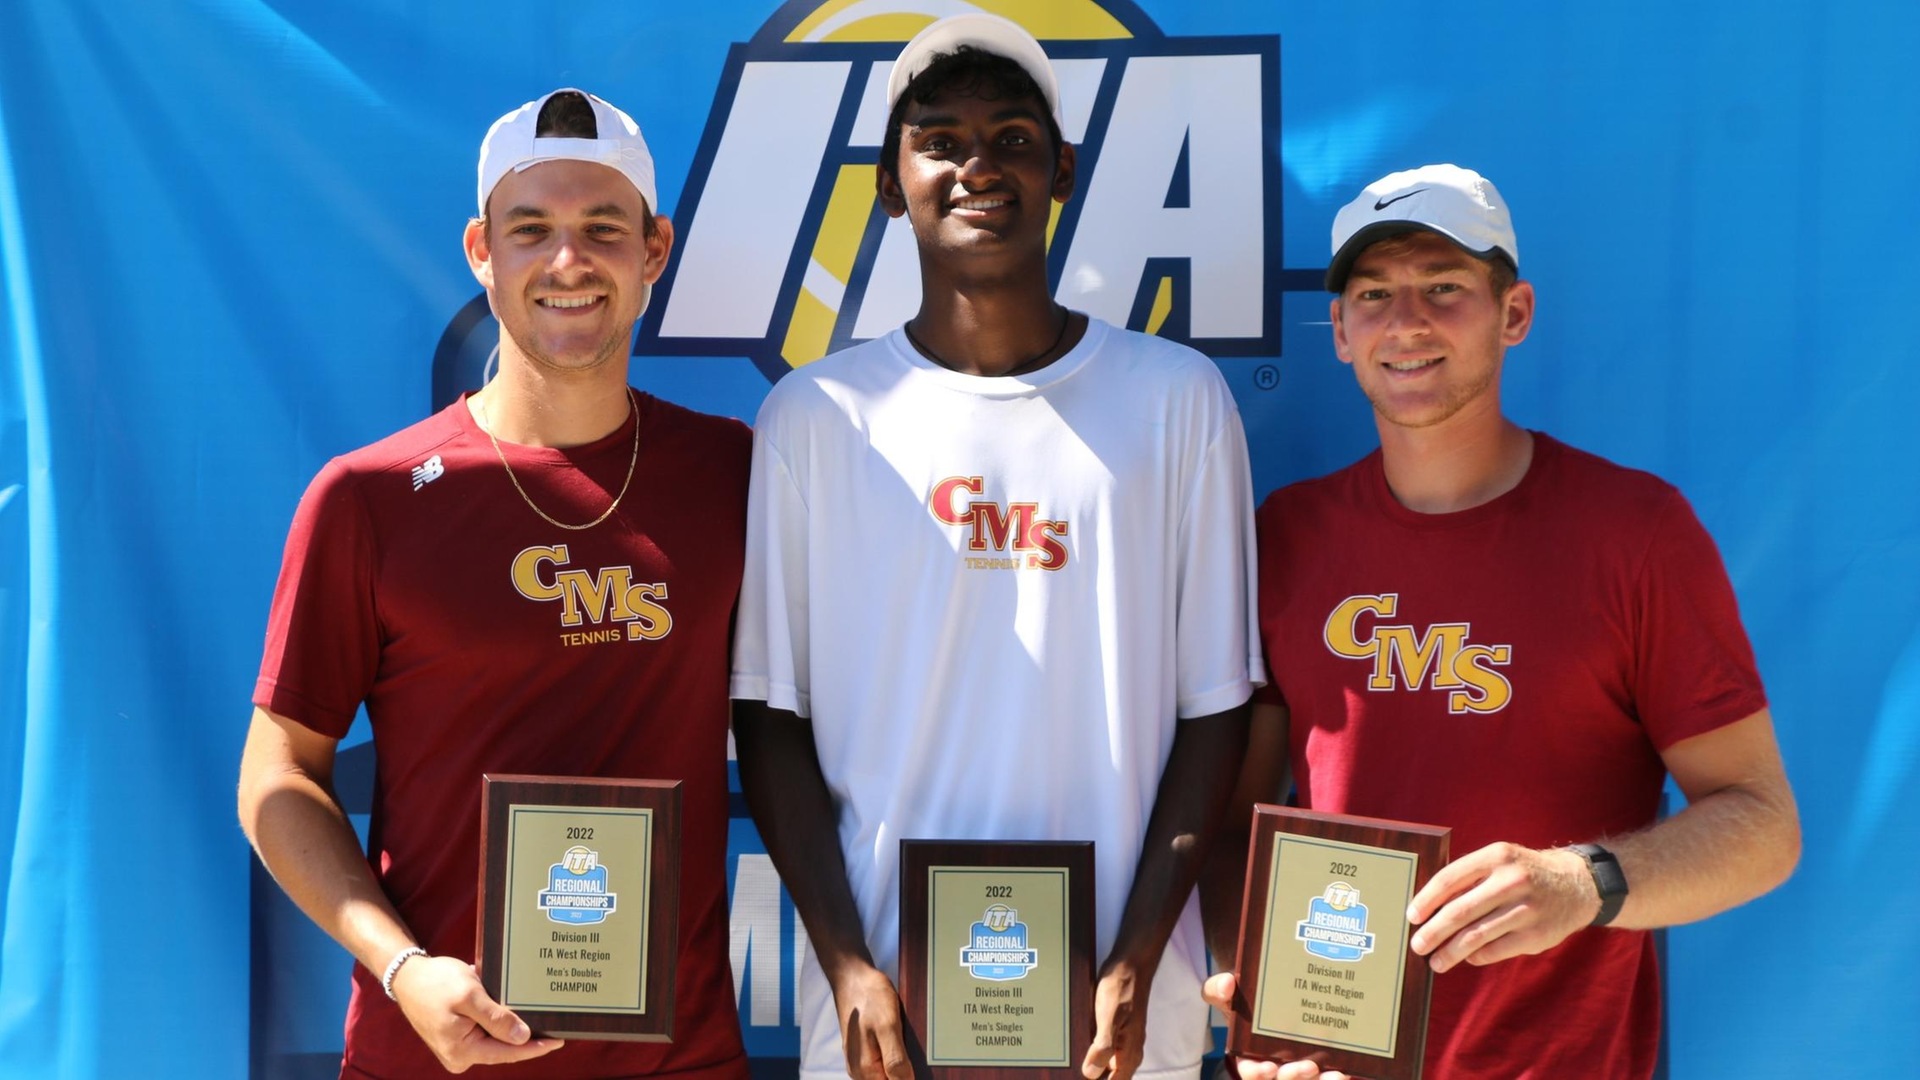 L to R: Christian Settles, Advik Mareedu and Matthew Robinson with their championship plaques